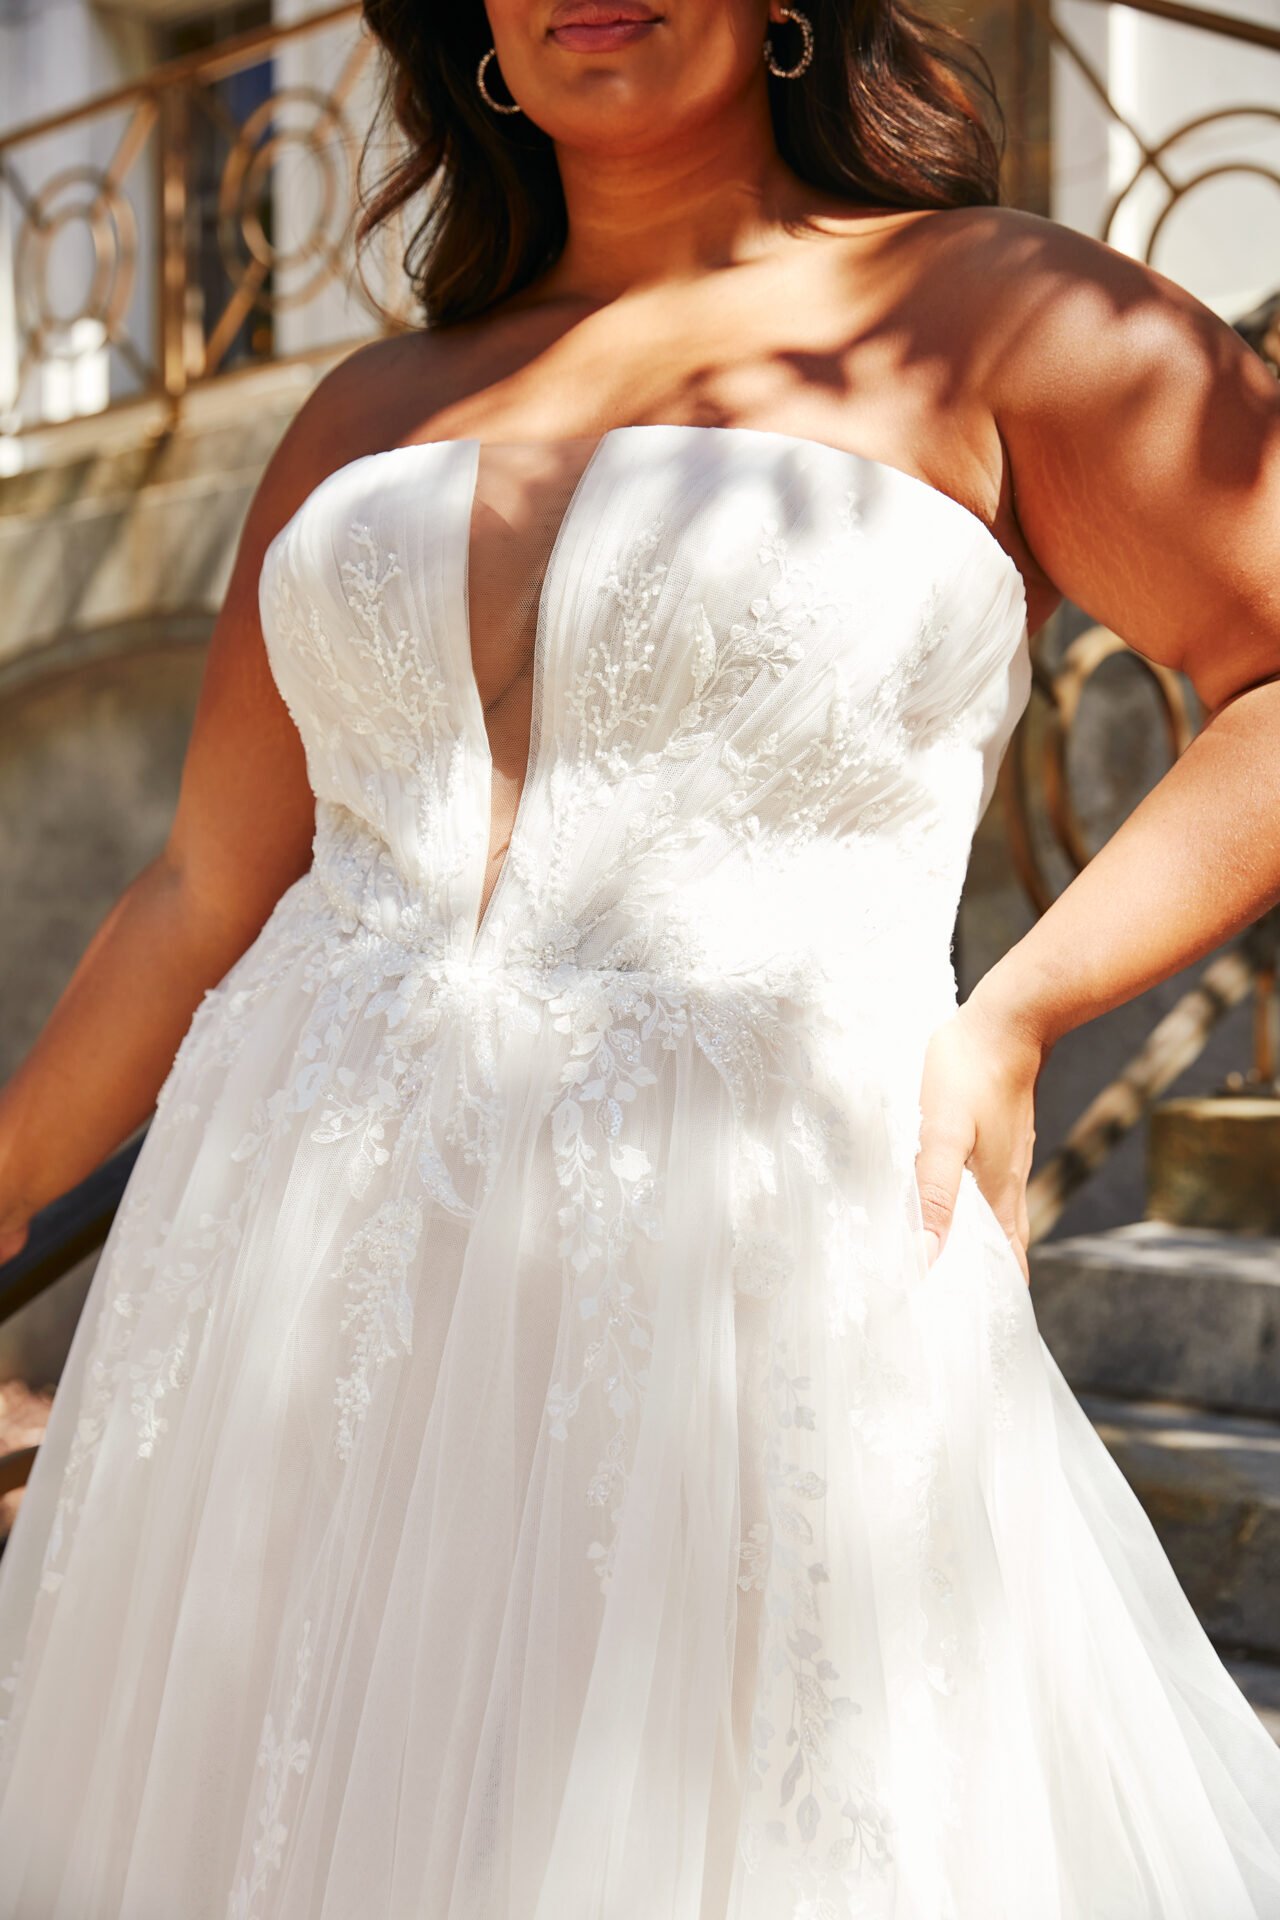 Plus Size Brides — The Wedding Bell